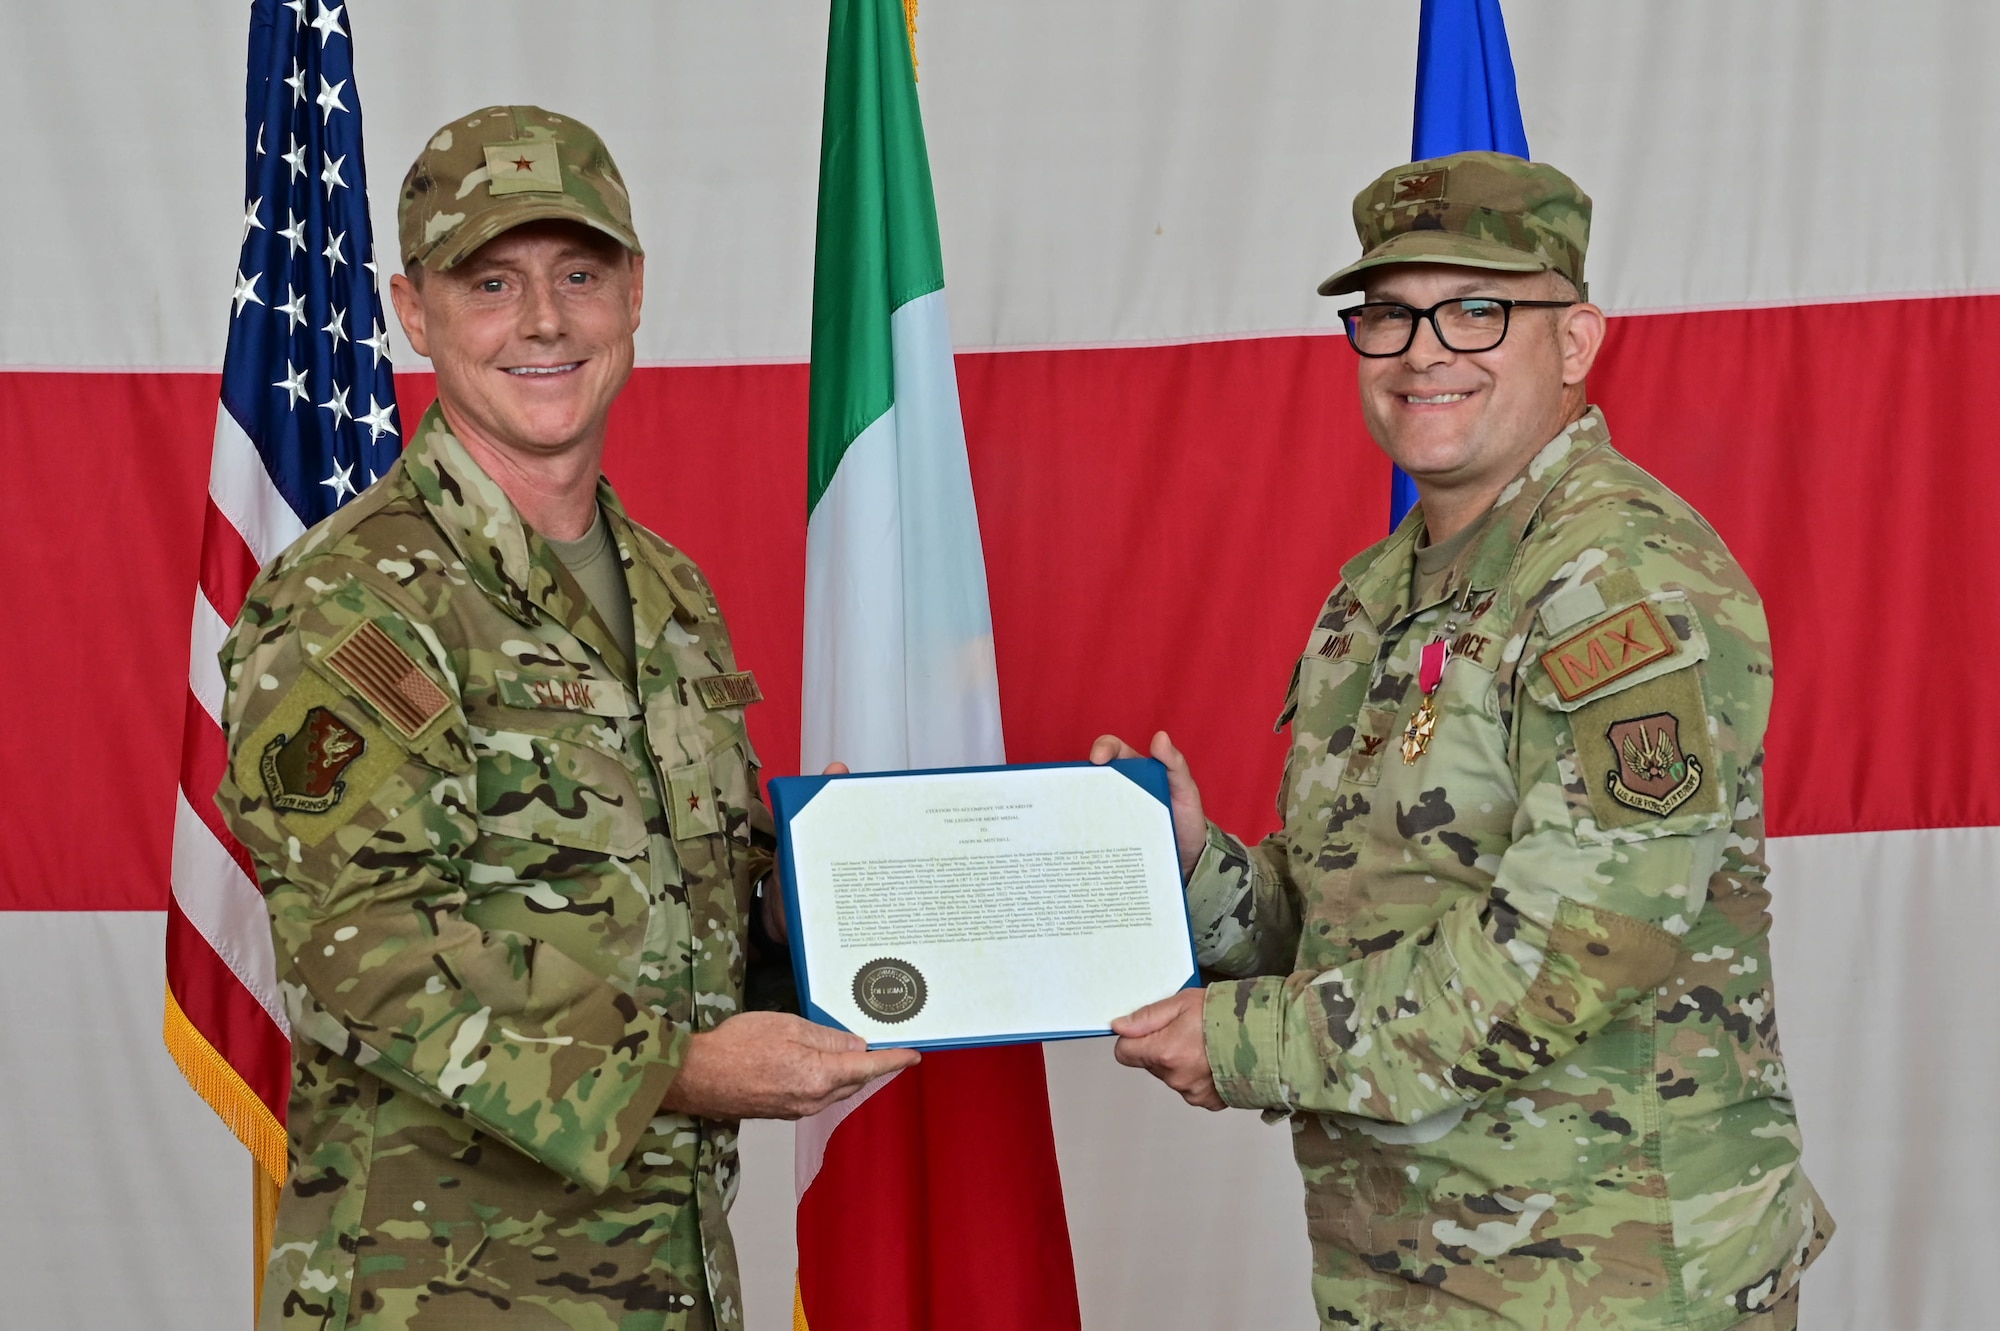 U.S. Air Force Brig. Gen. Tad Clark, 31st Fighter Wing commander, presents a certificate to U.S. Air Force Col. Jason Mitchell, 31st Maintenance Group outgoing commander, at Aviano Air Base, Italy, June 15, 2023. The 31st Maintenance Group responds to humanitarian and contingency logistics support requirements in Europe, African and Southwest Asia. (U.S. Air Force photo by Airman Zachary Jakel)